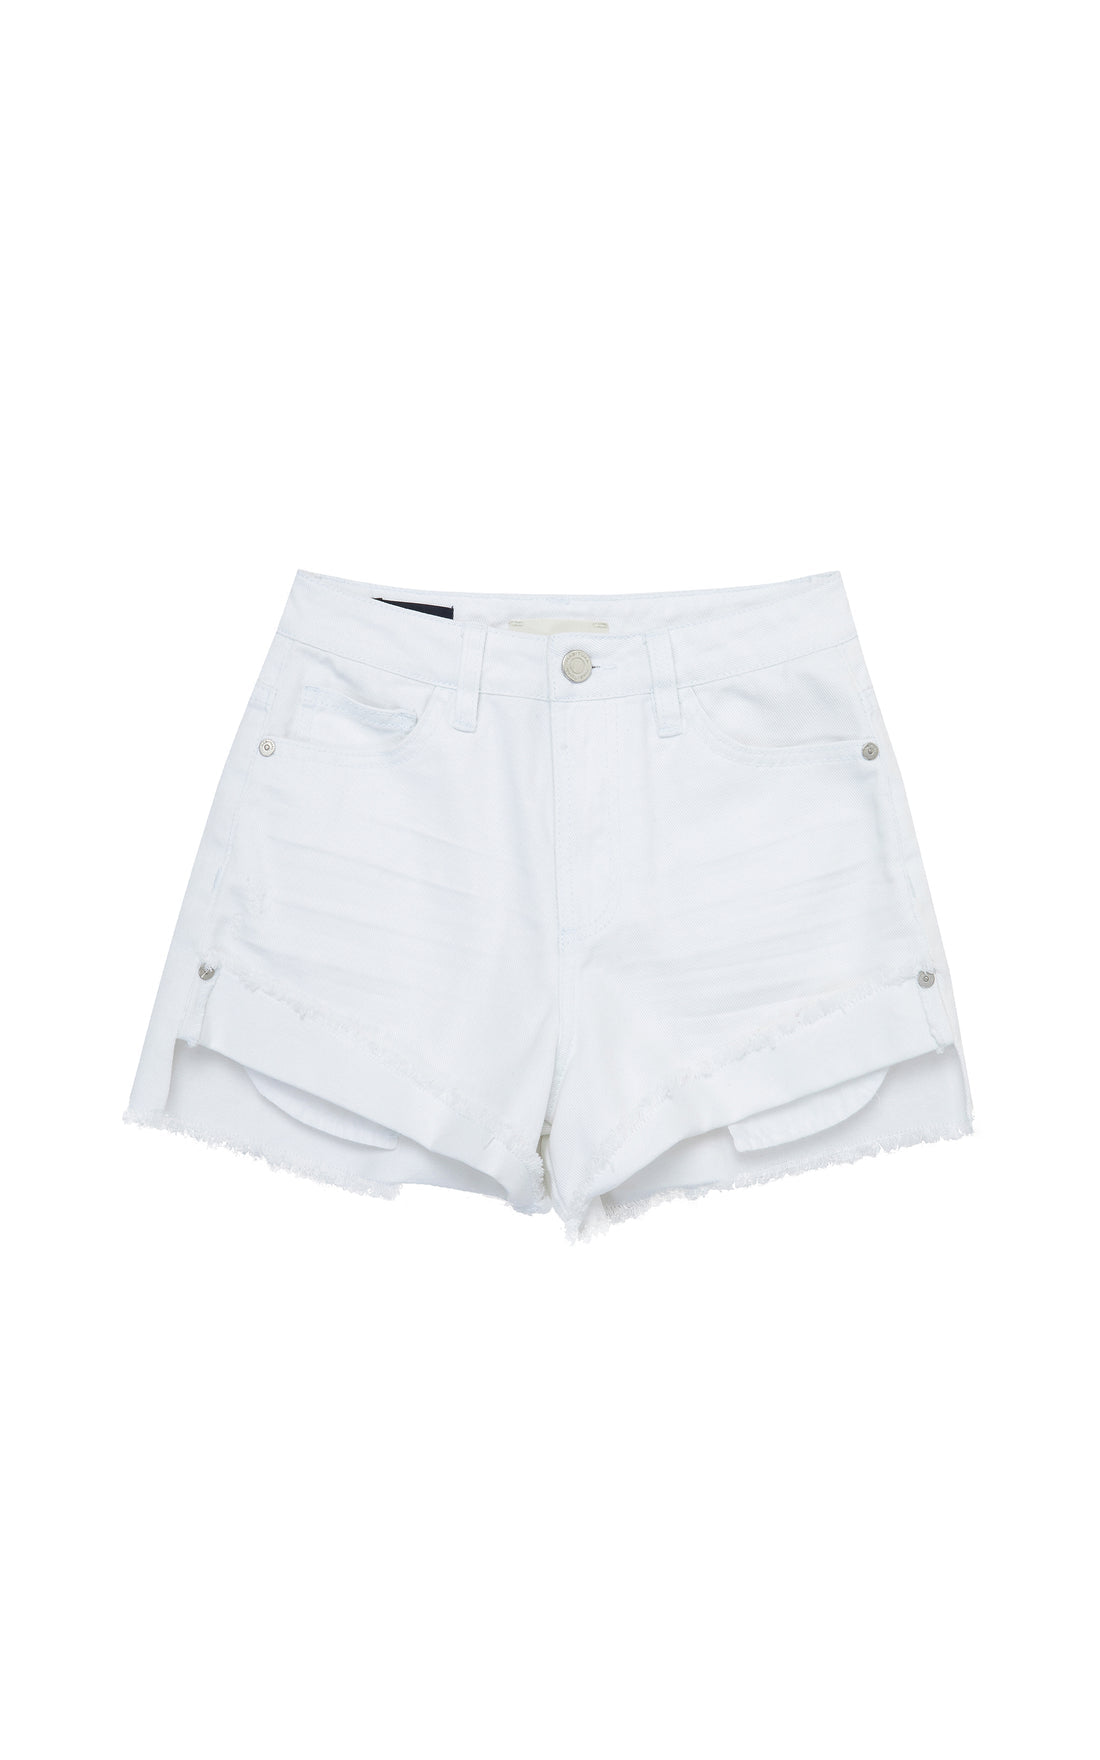 Front Cuffed Shorts with Exposed Pockets